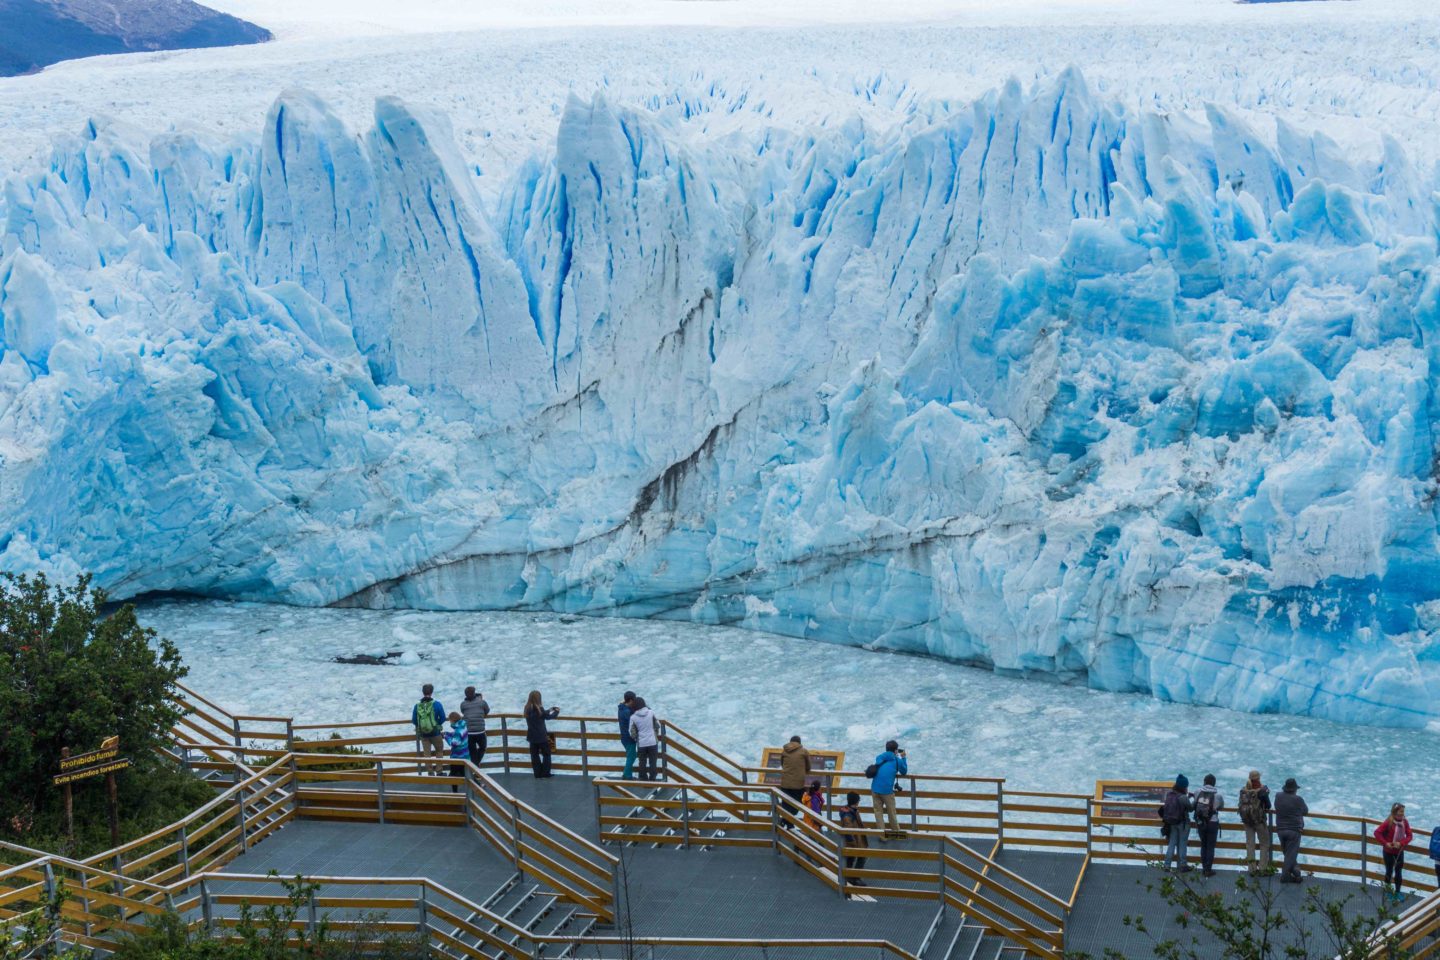 Tourists on a wooden platform with railings, looking at a blue glacier.